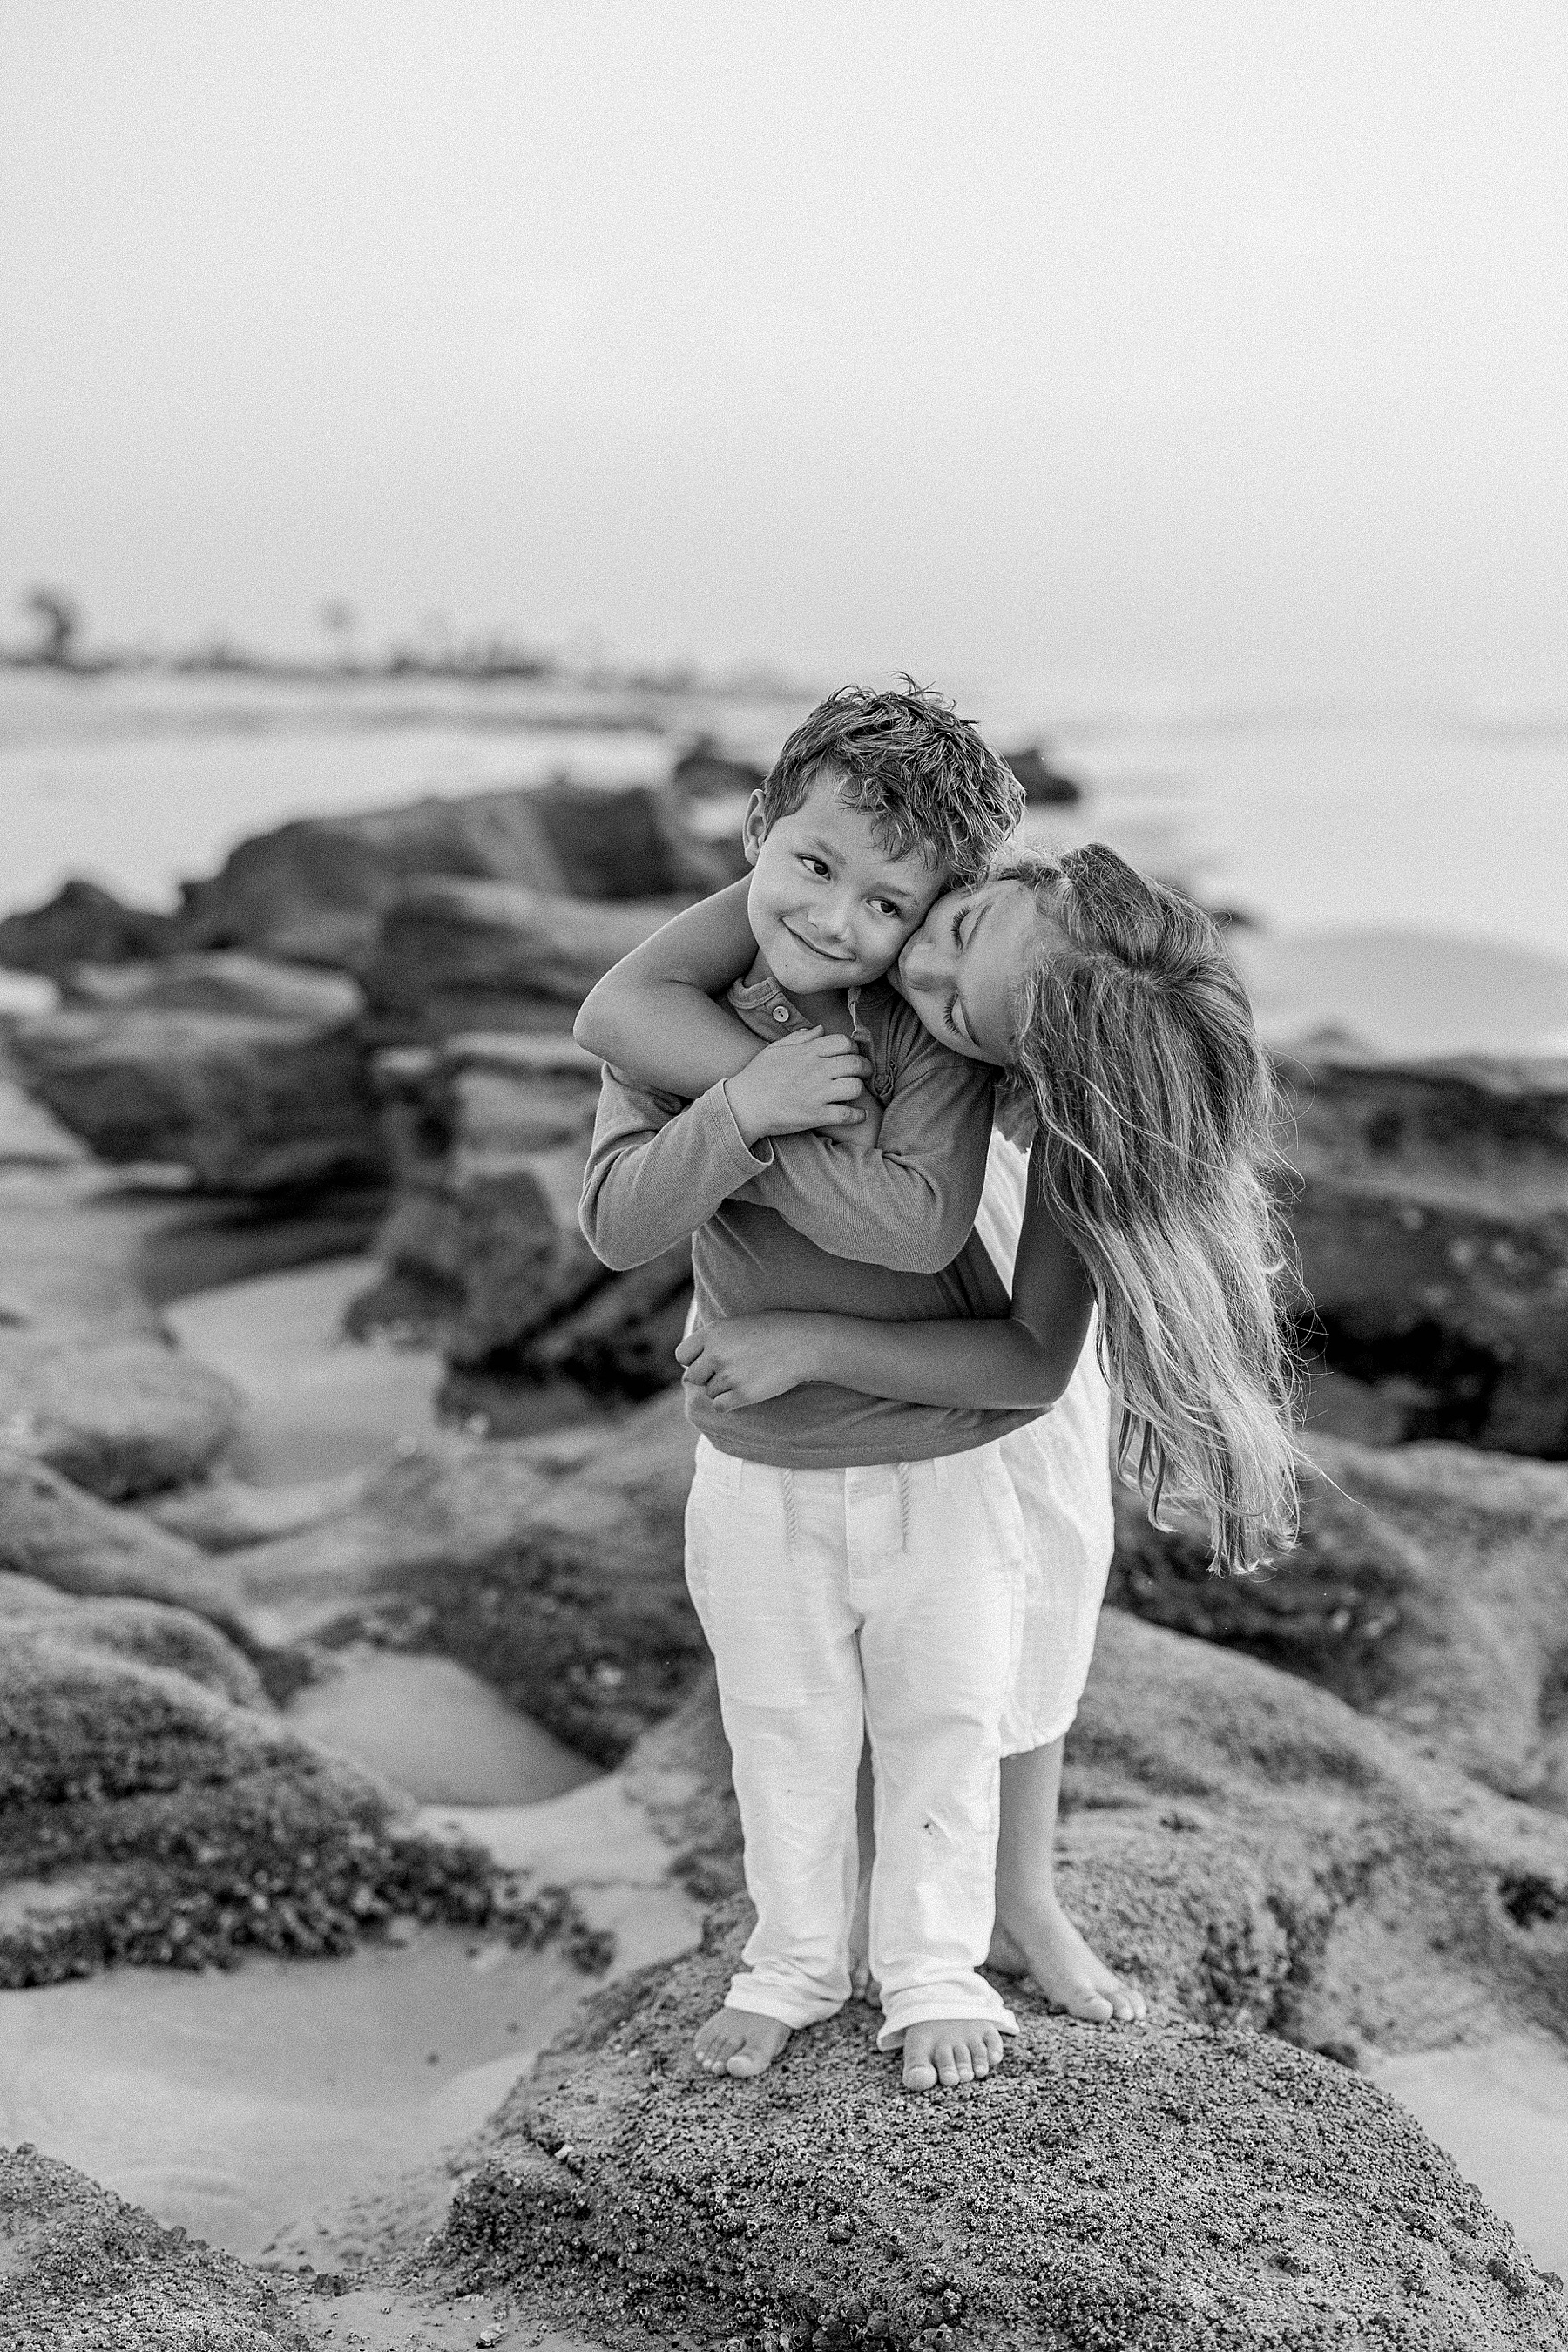 kids kissing on the beach in black and white